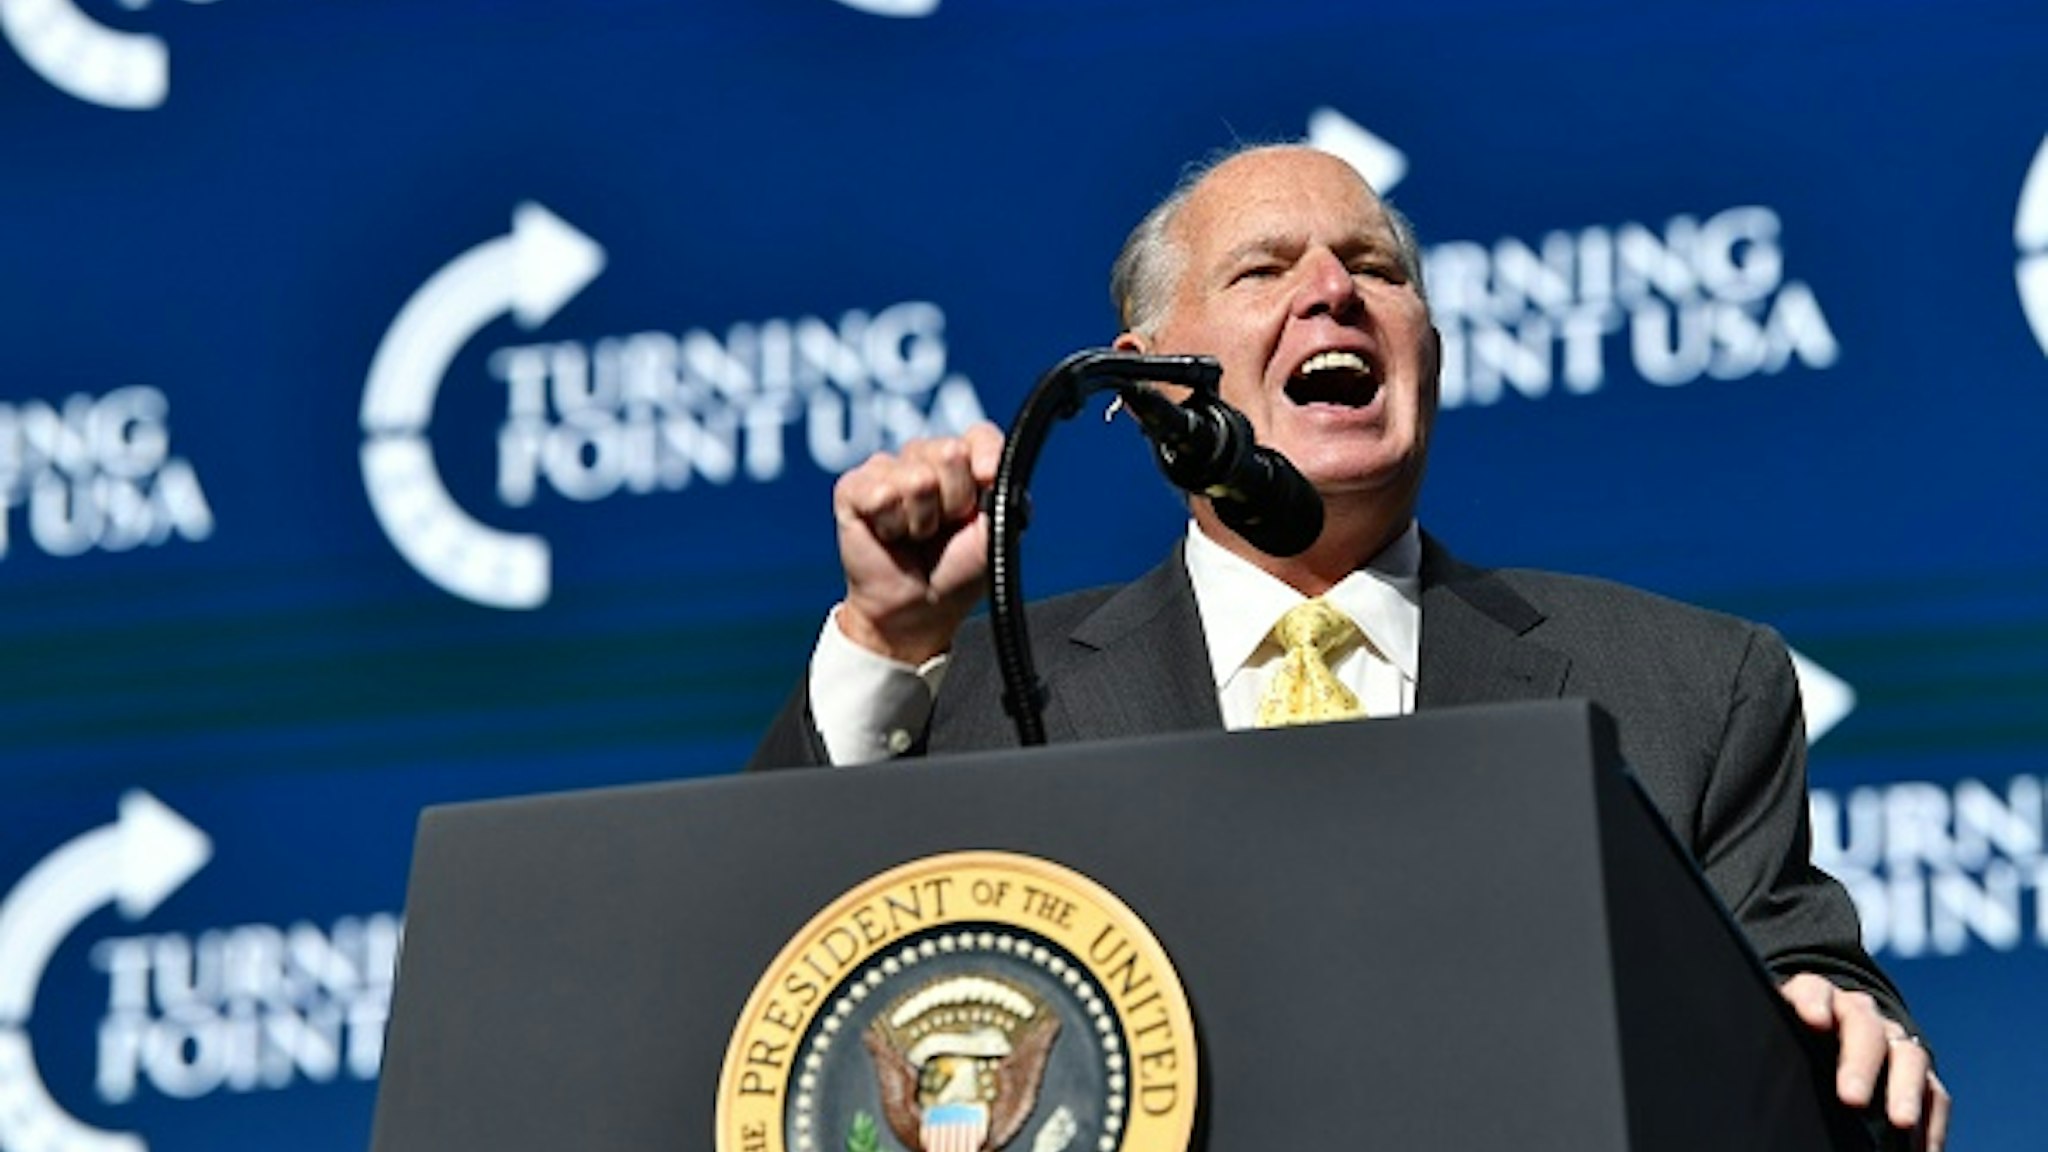 Rush Limbaugh speaks before US President Donald Trump takes the stage during the Turning Point USA Student Action Summit at the Palm Beach County Convention Center in West Palm Beach, Florida on December 21, 2019.